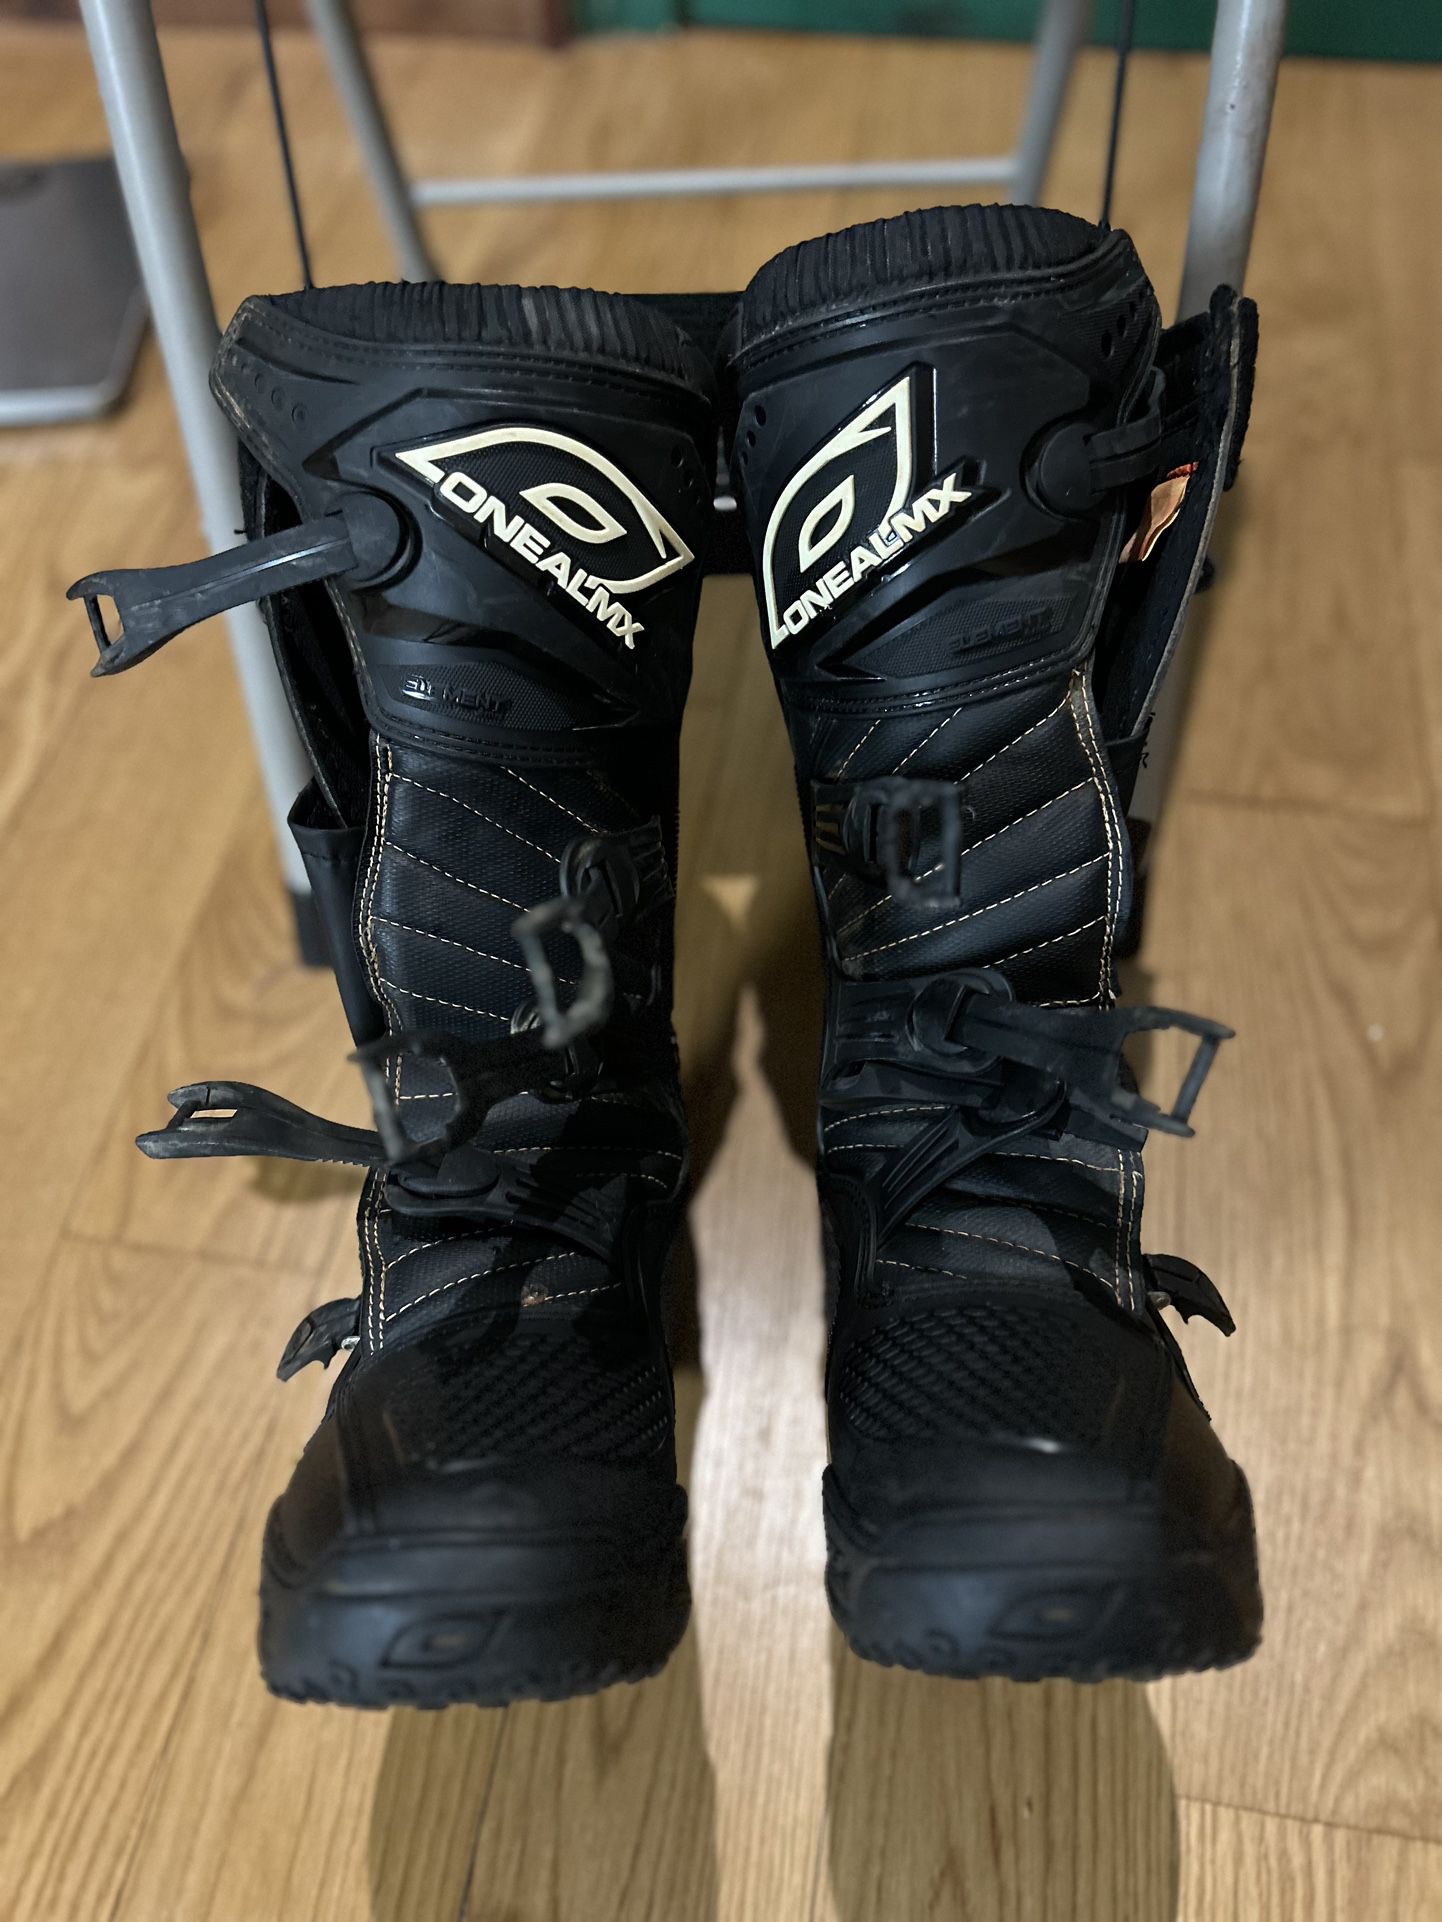 ONEAL ELEMENT Motocross Boots Men's Size 12